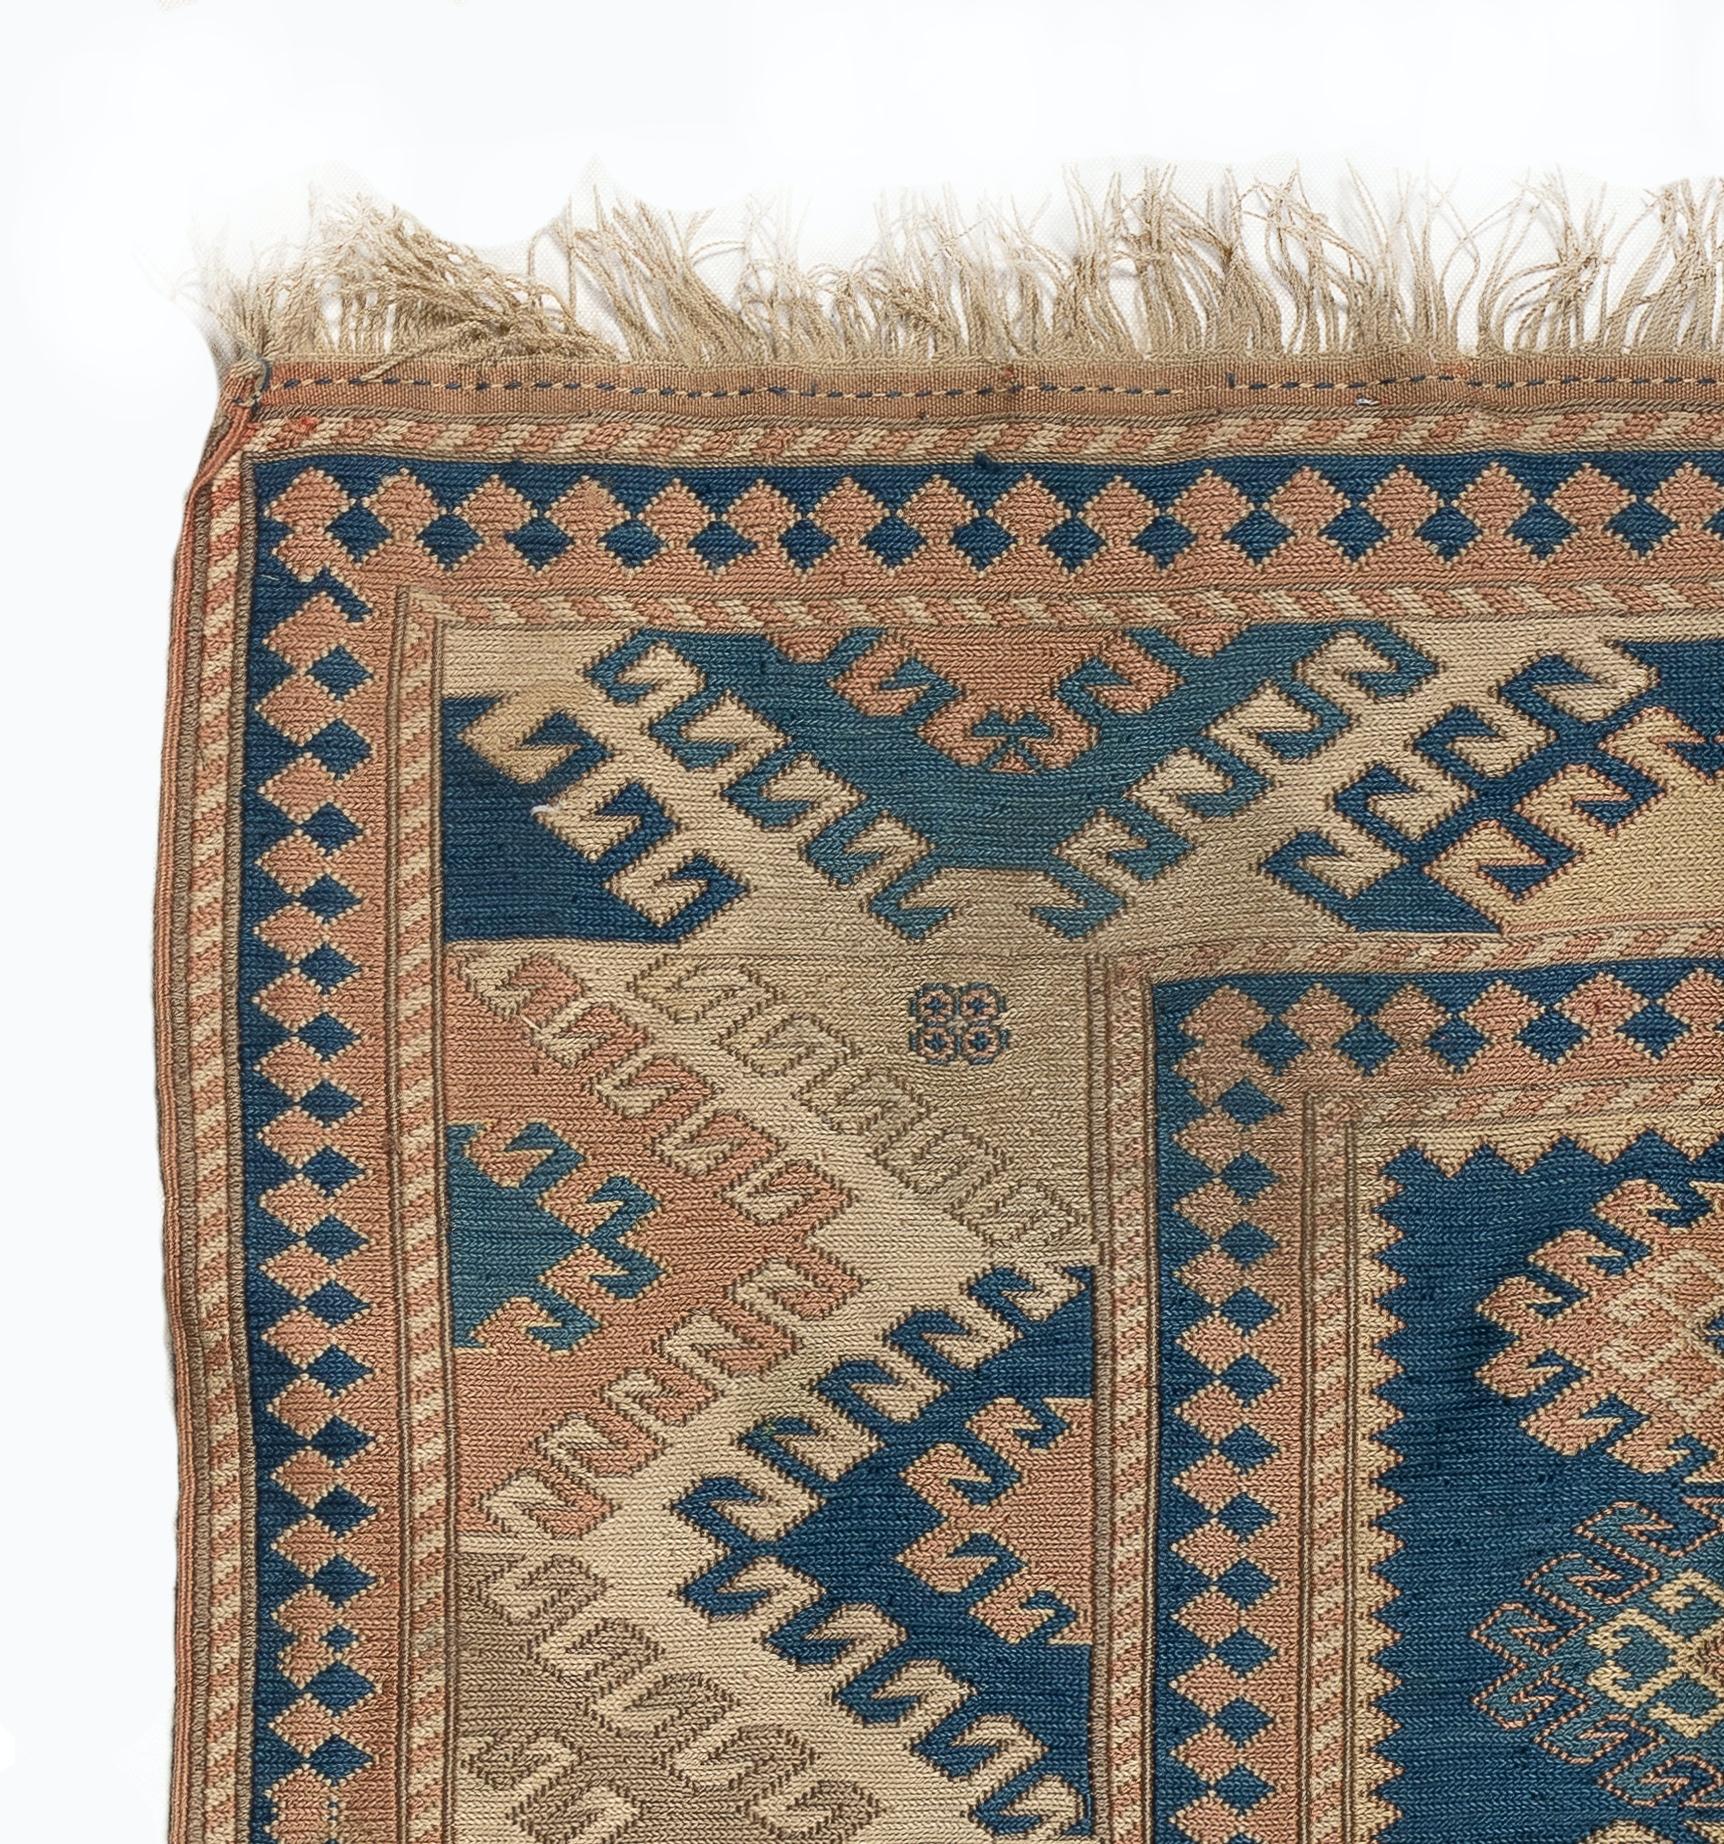 A vintage Turkish carpet from the 1960s featuring a geometric design with linked latch hook medallions at its centre and a very large border decorated all over with bigger half latch-hook medallions, all in navy blue, pale terra cotta red and sand